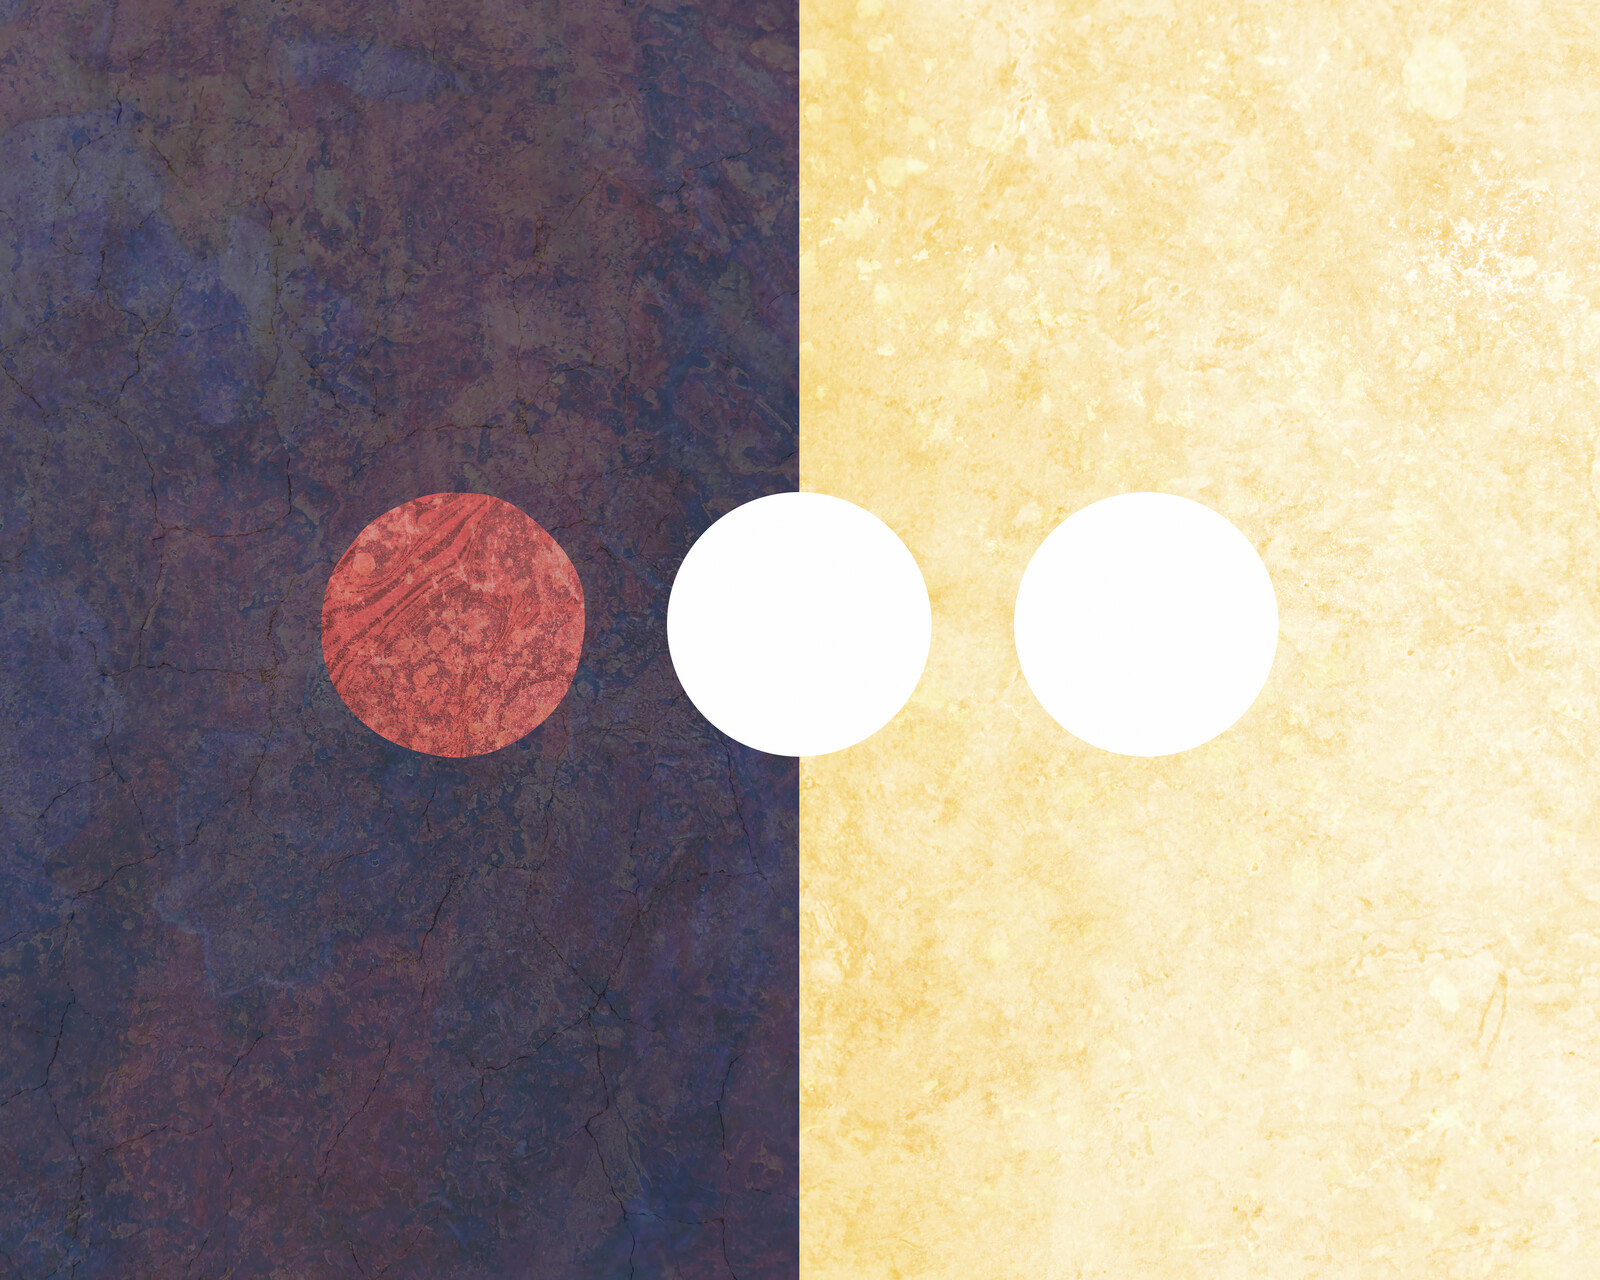 From left: a red circle, a white circle, and a white circle.